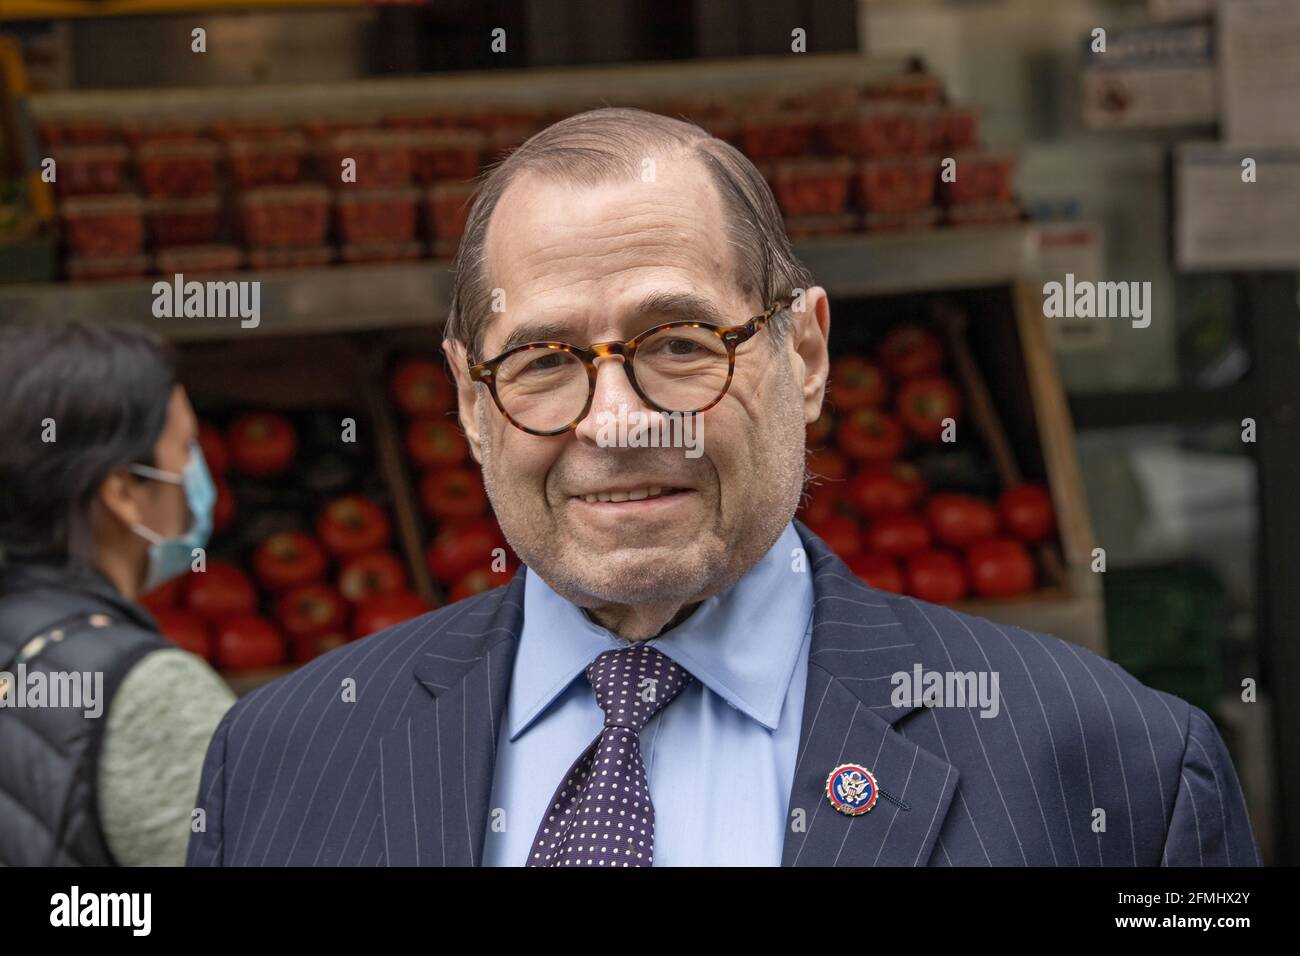 NEW YORK, NY – May 09: Congressmember Jerry Nadler attends Scott Stringer's campaign stop on the Upper West Side in front of Fairway Market on 74 and Broadway on May 9, 2021 in New York City.  Voters will go to the polls for the Primary on June 22. Credit: Ron Adar/Alamy Live News Stock Photo